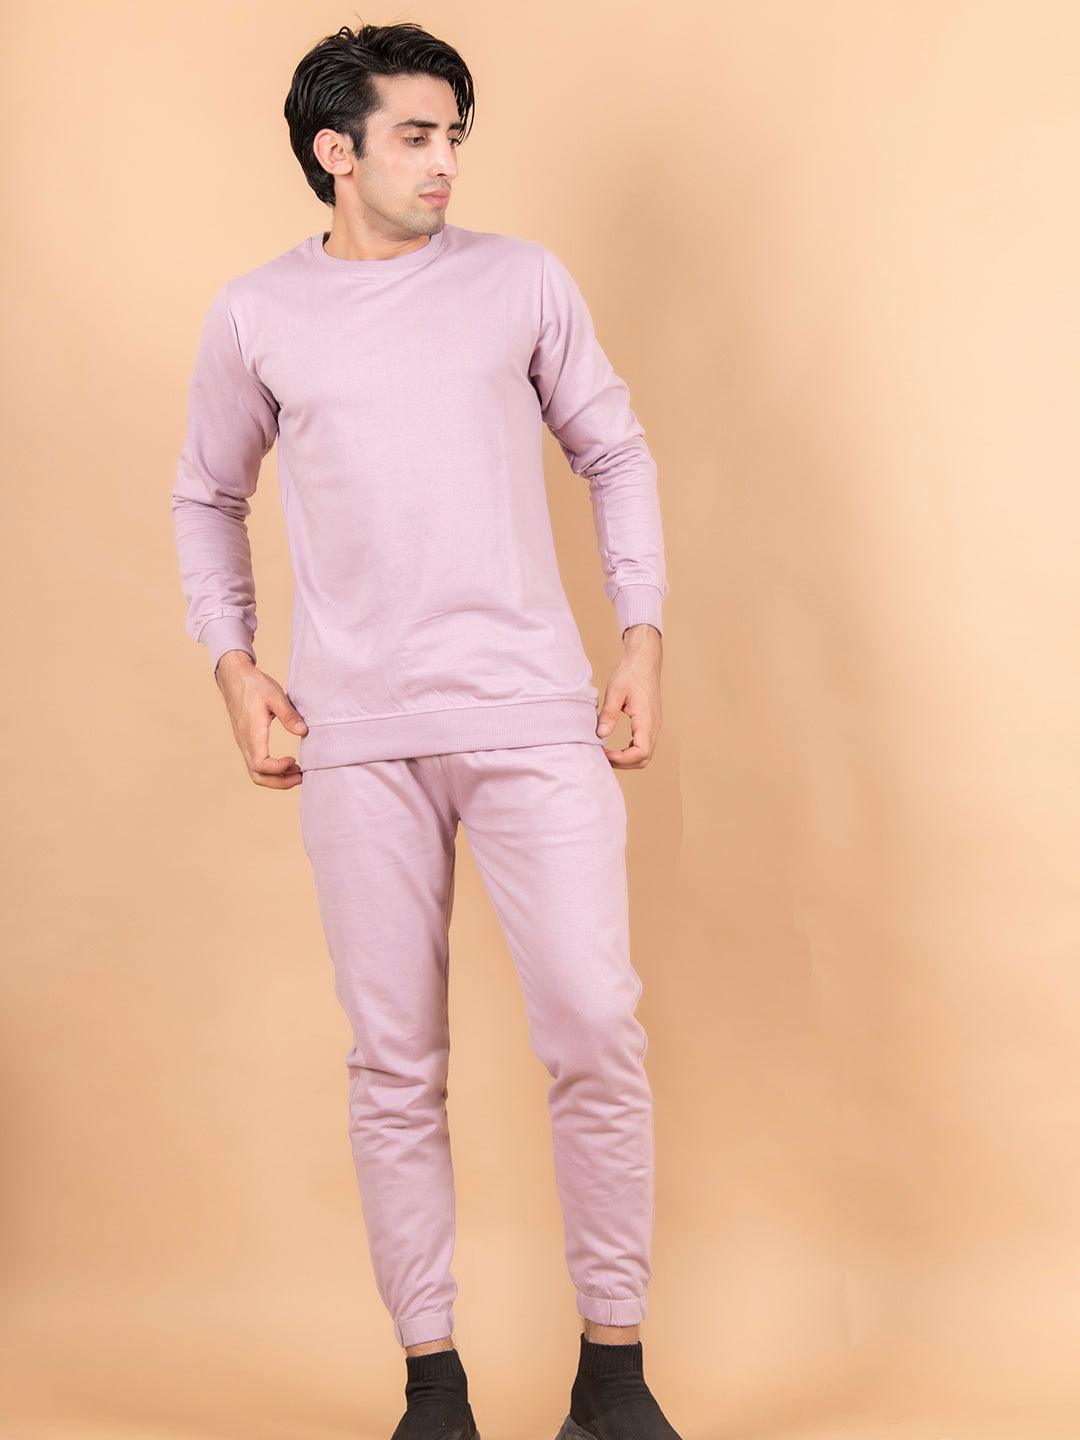 Solid Lilac Sweatshirt Pattern with Shorts Co-Ord Set - Tistabene